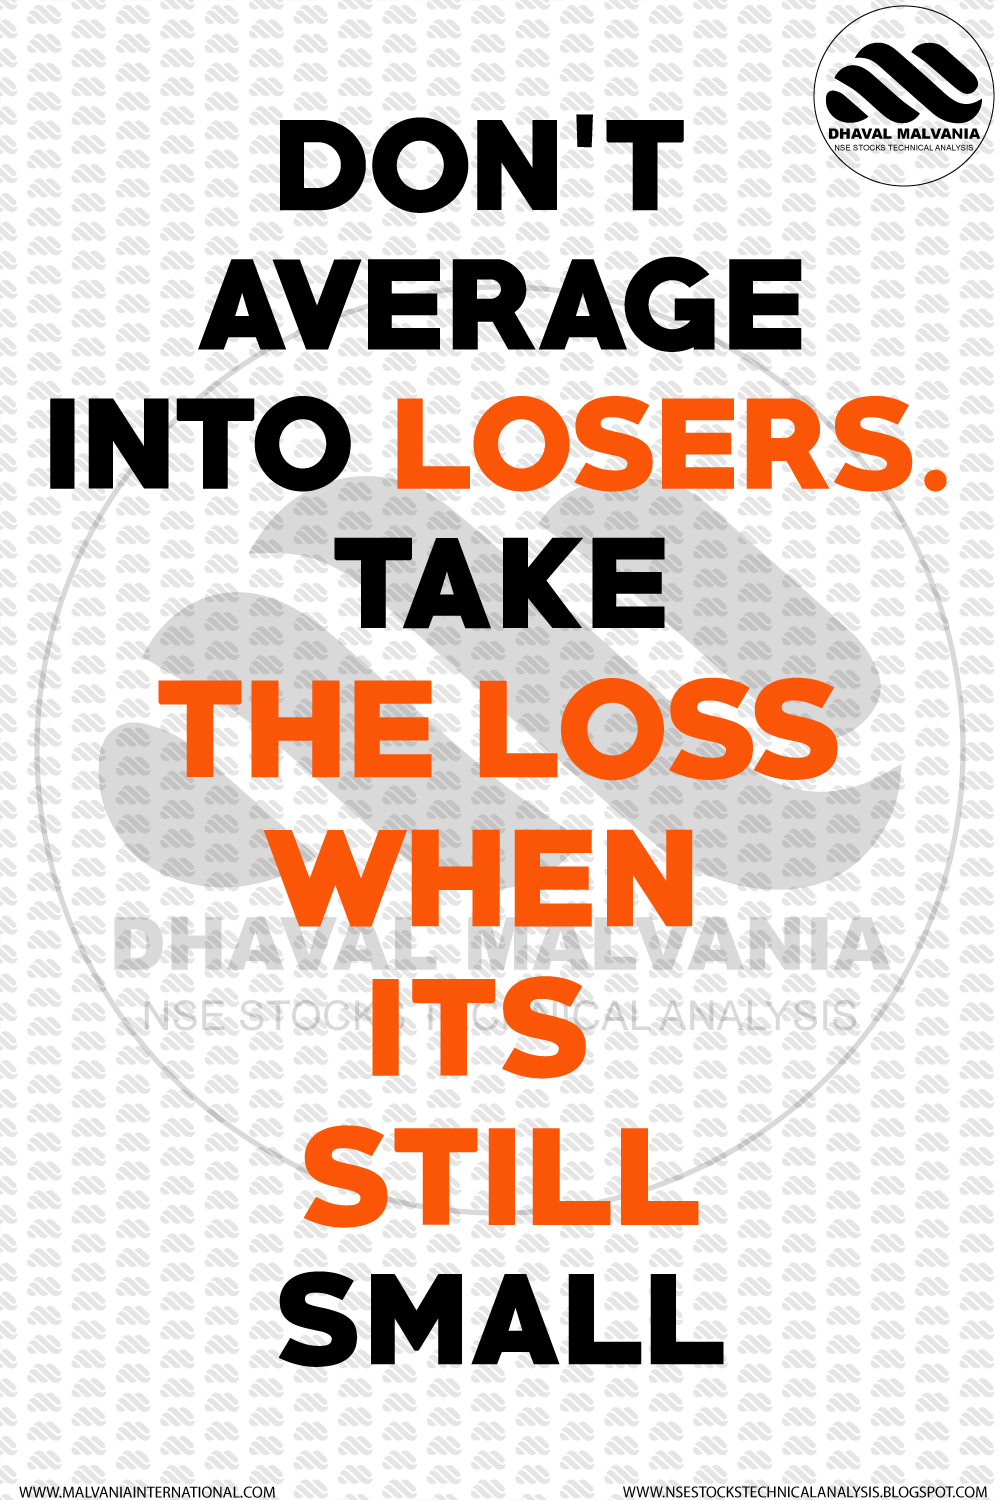 #shorts Don't average into losers, take the loss https://youtu.be/TfoL1ORJxsc